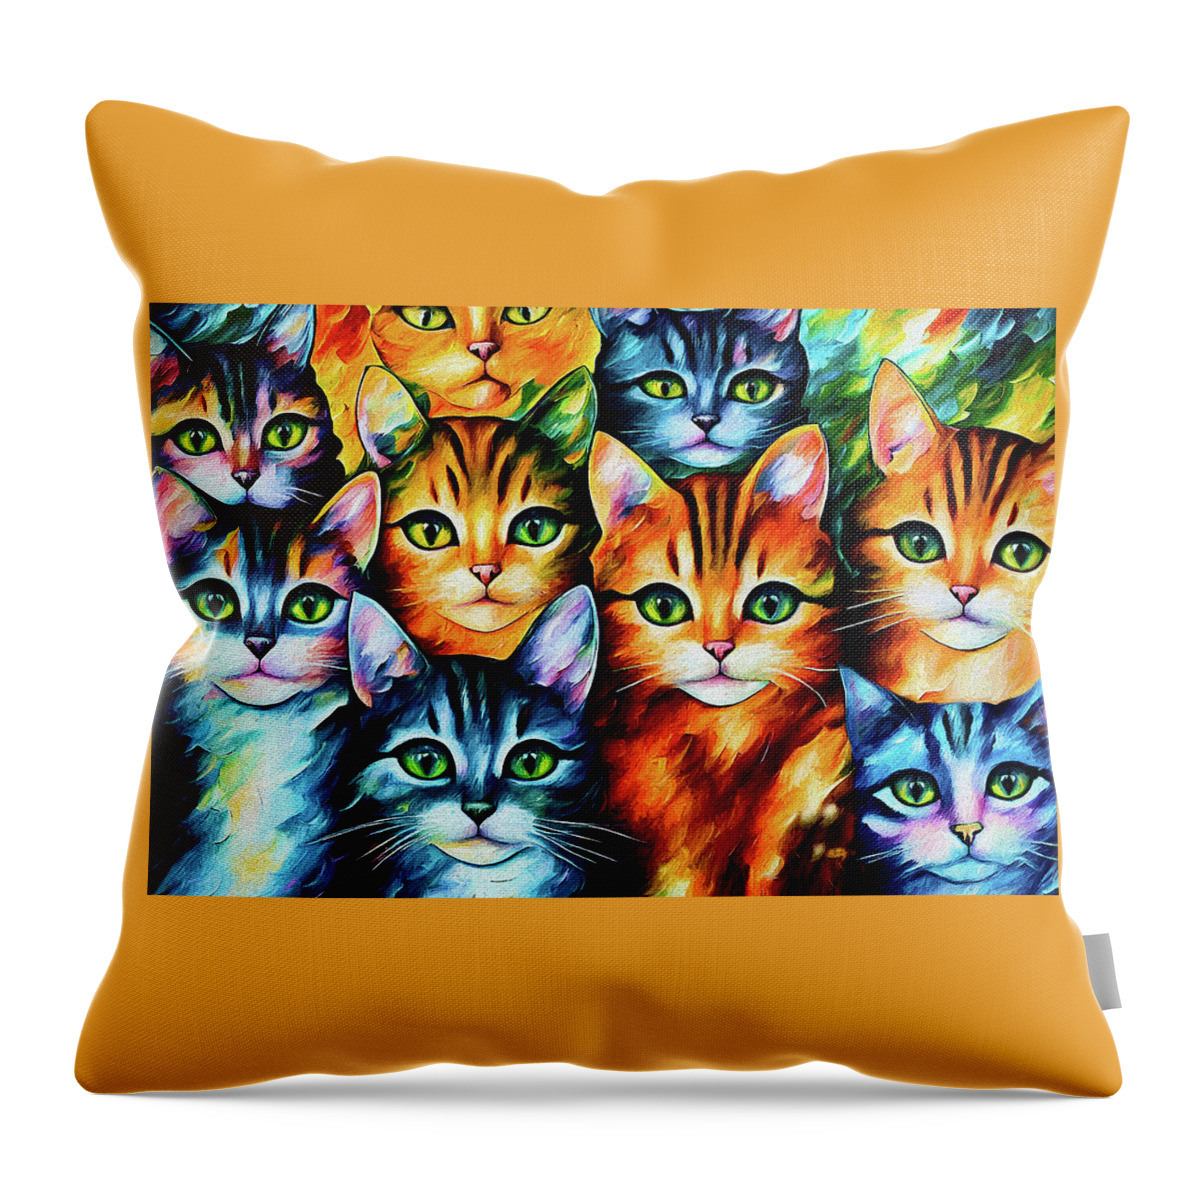 Cats Throw Pillow featuring the digital art Nine Lives by Peggy Collins